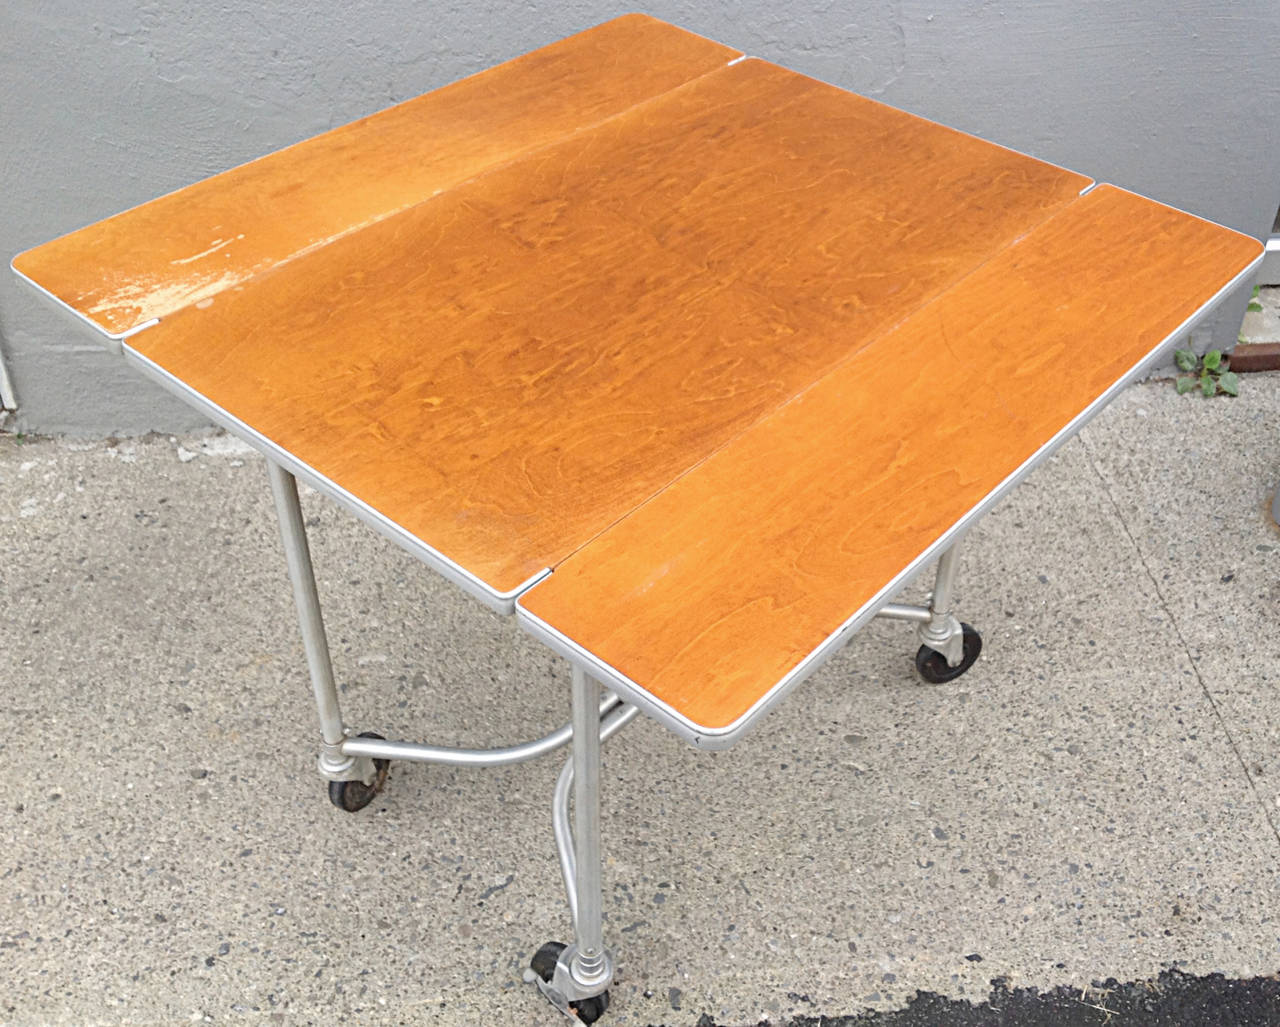 Fantastic 1930's aluminum and birch drop leaf rolling table by Warren McArthur. Classic Aluminum tube framing with signature McArthur hardware. Large heavy rubber locking casters. Original finish and warm patina to birch top. Aluminum edge banding